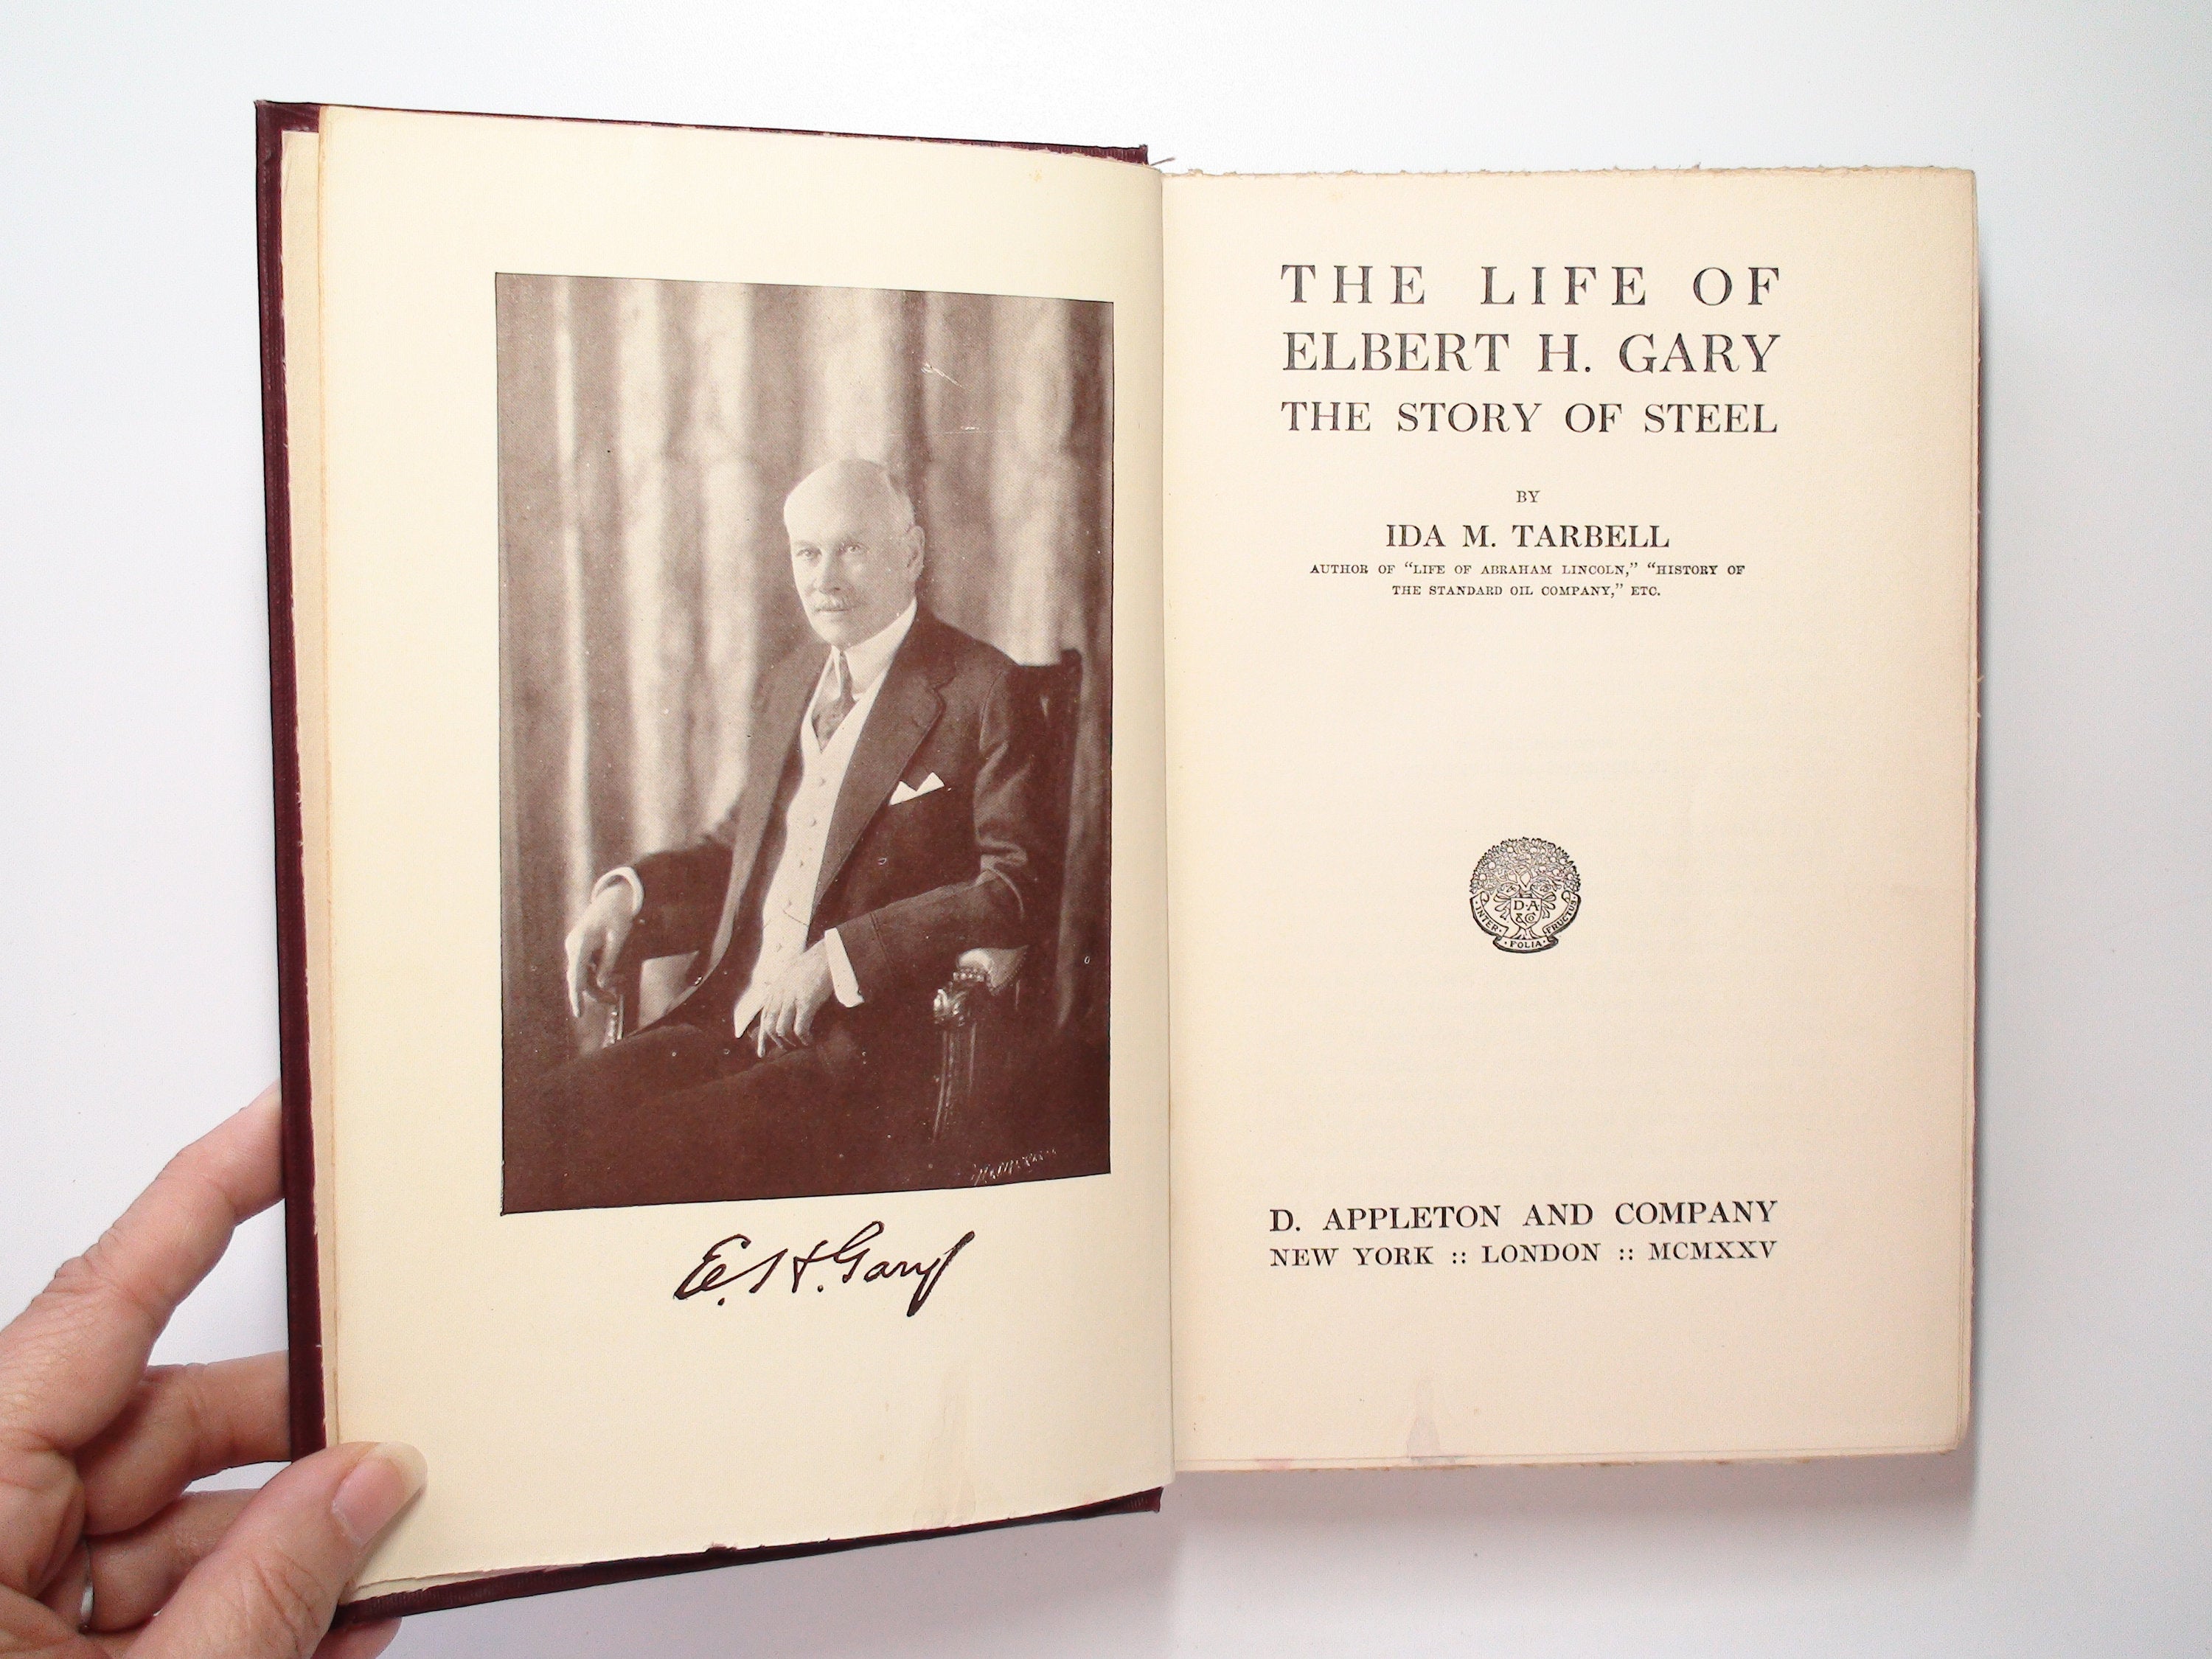 The Life of Elbert H. Gary, The Story of Steel, by Ida M. Tarbell, 1st Ed, 1925